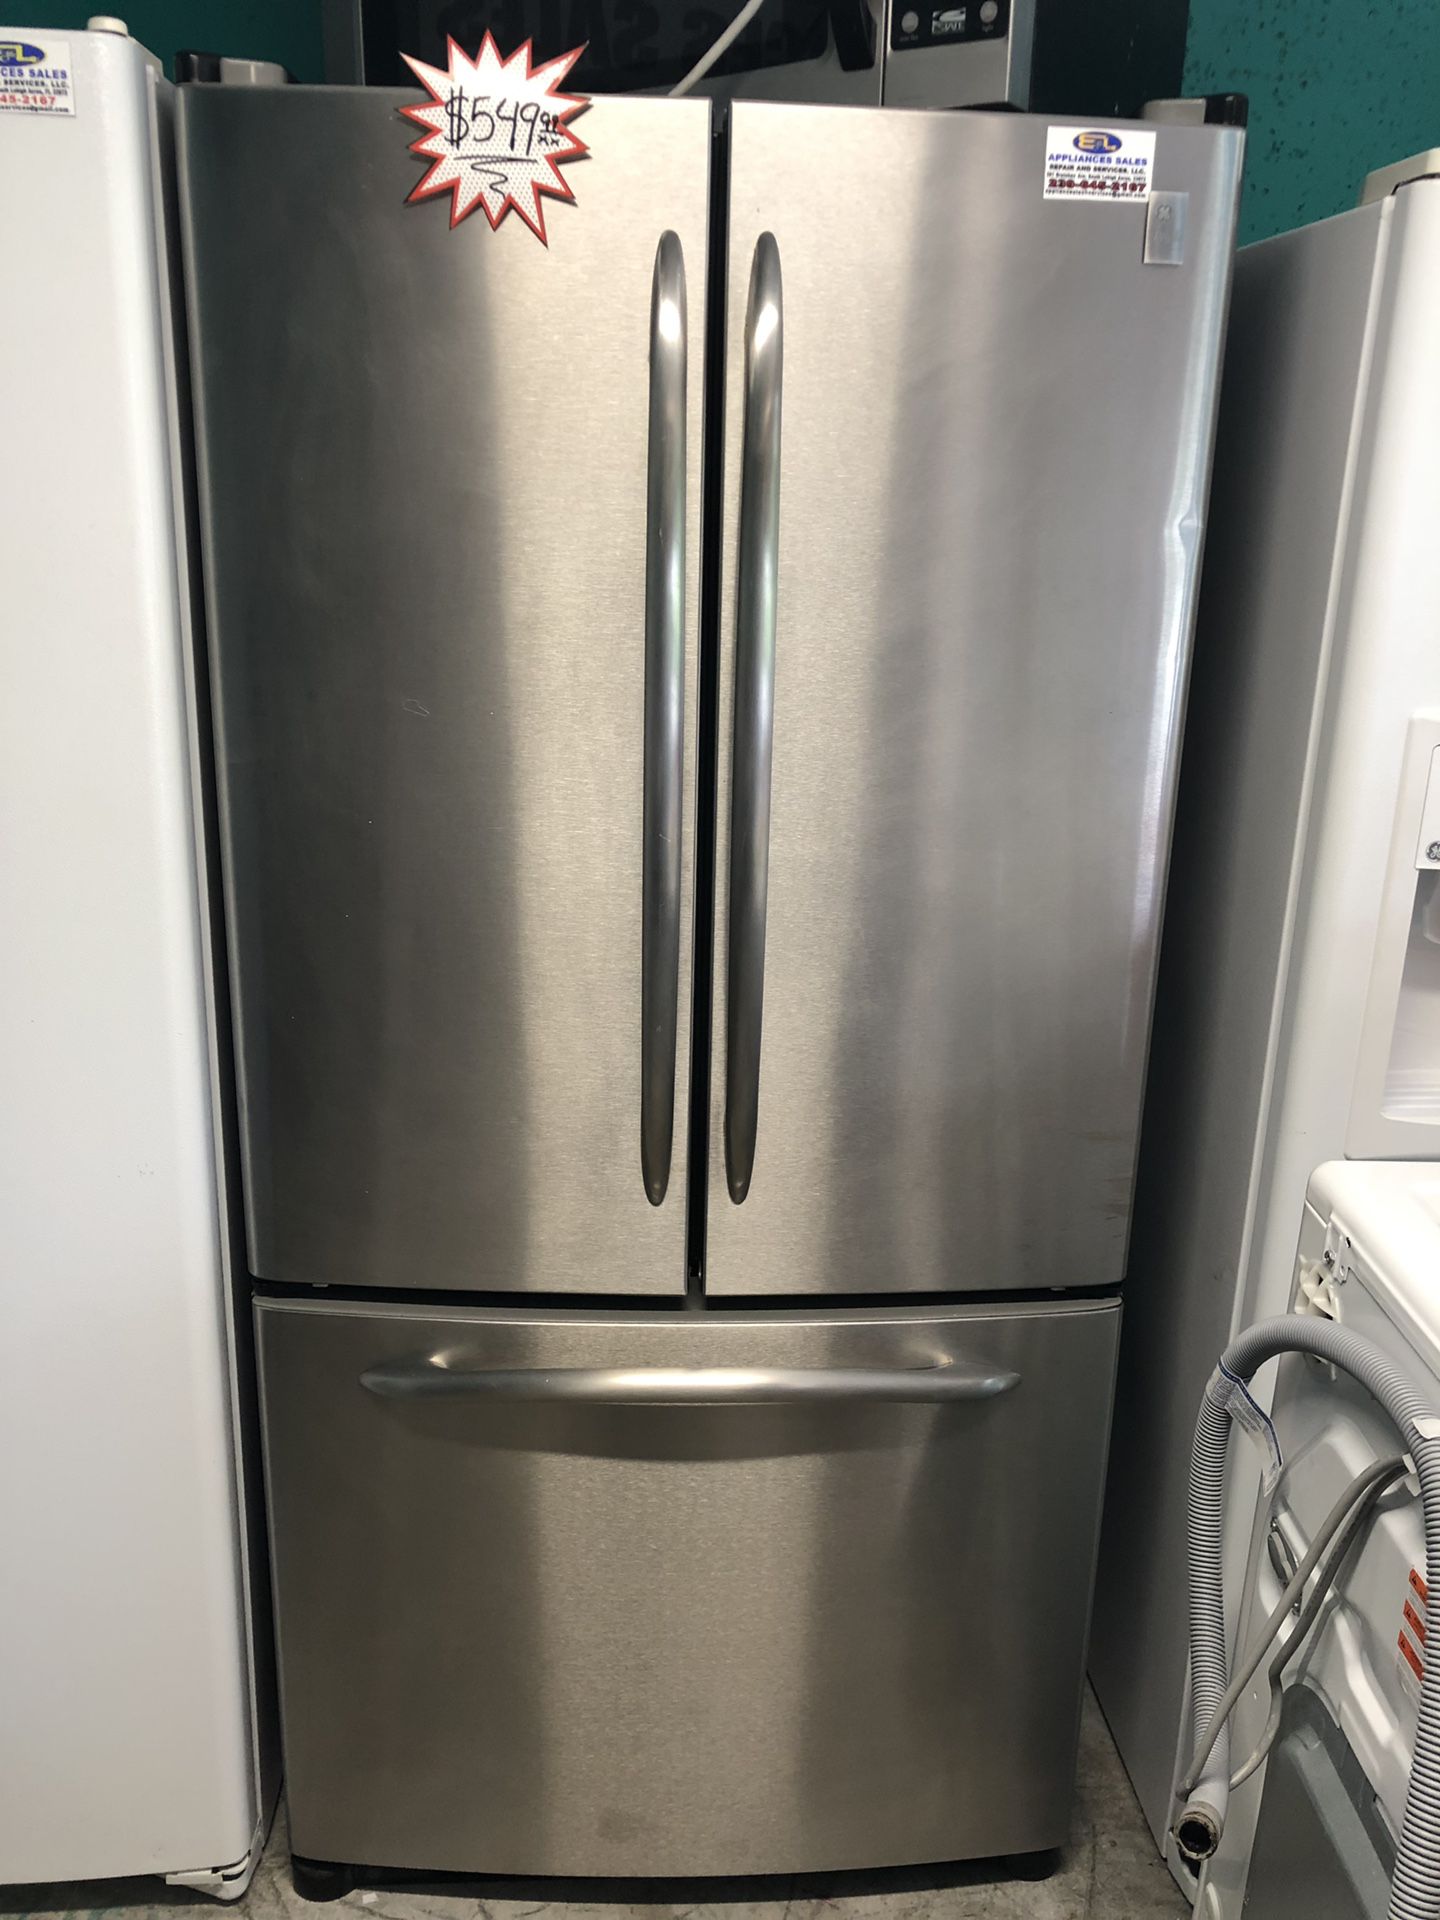 A stainless steel GE Profile French door refrigerator